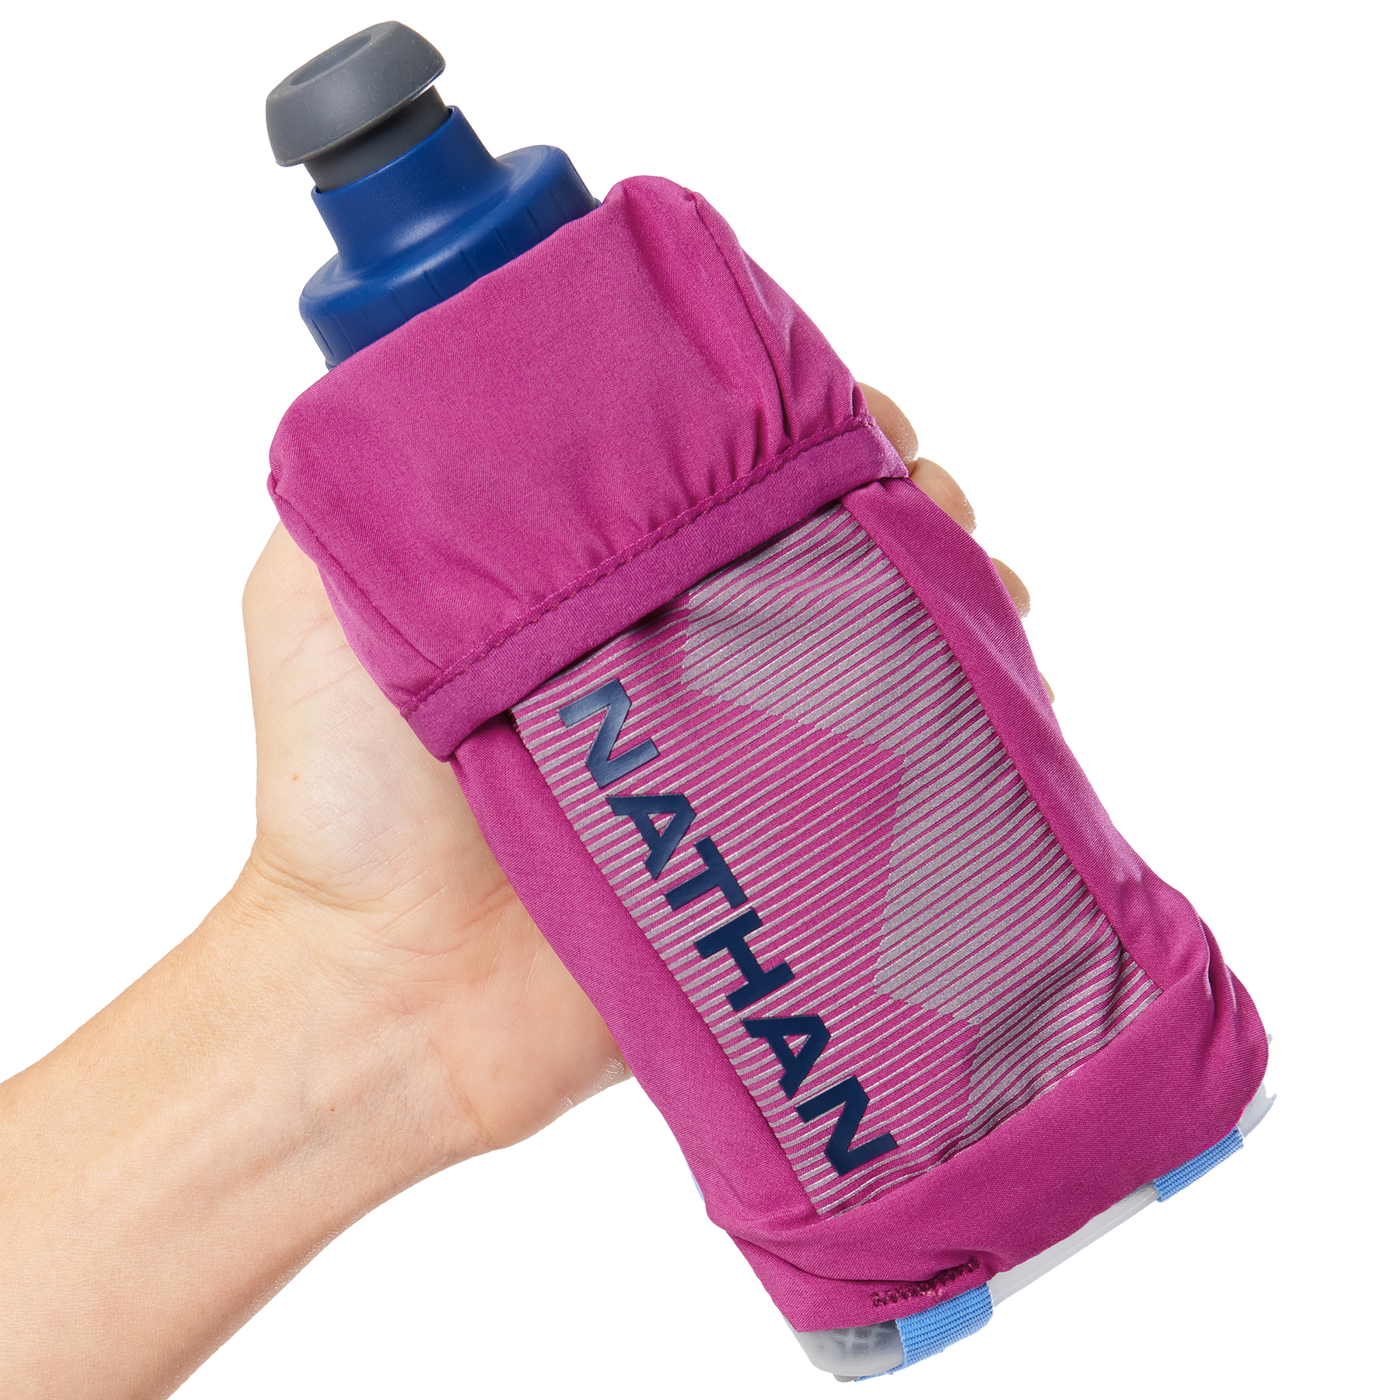 Nathan QuickSqueeze 12oz Insulated Handheld - NS70300-70052